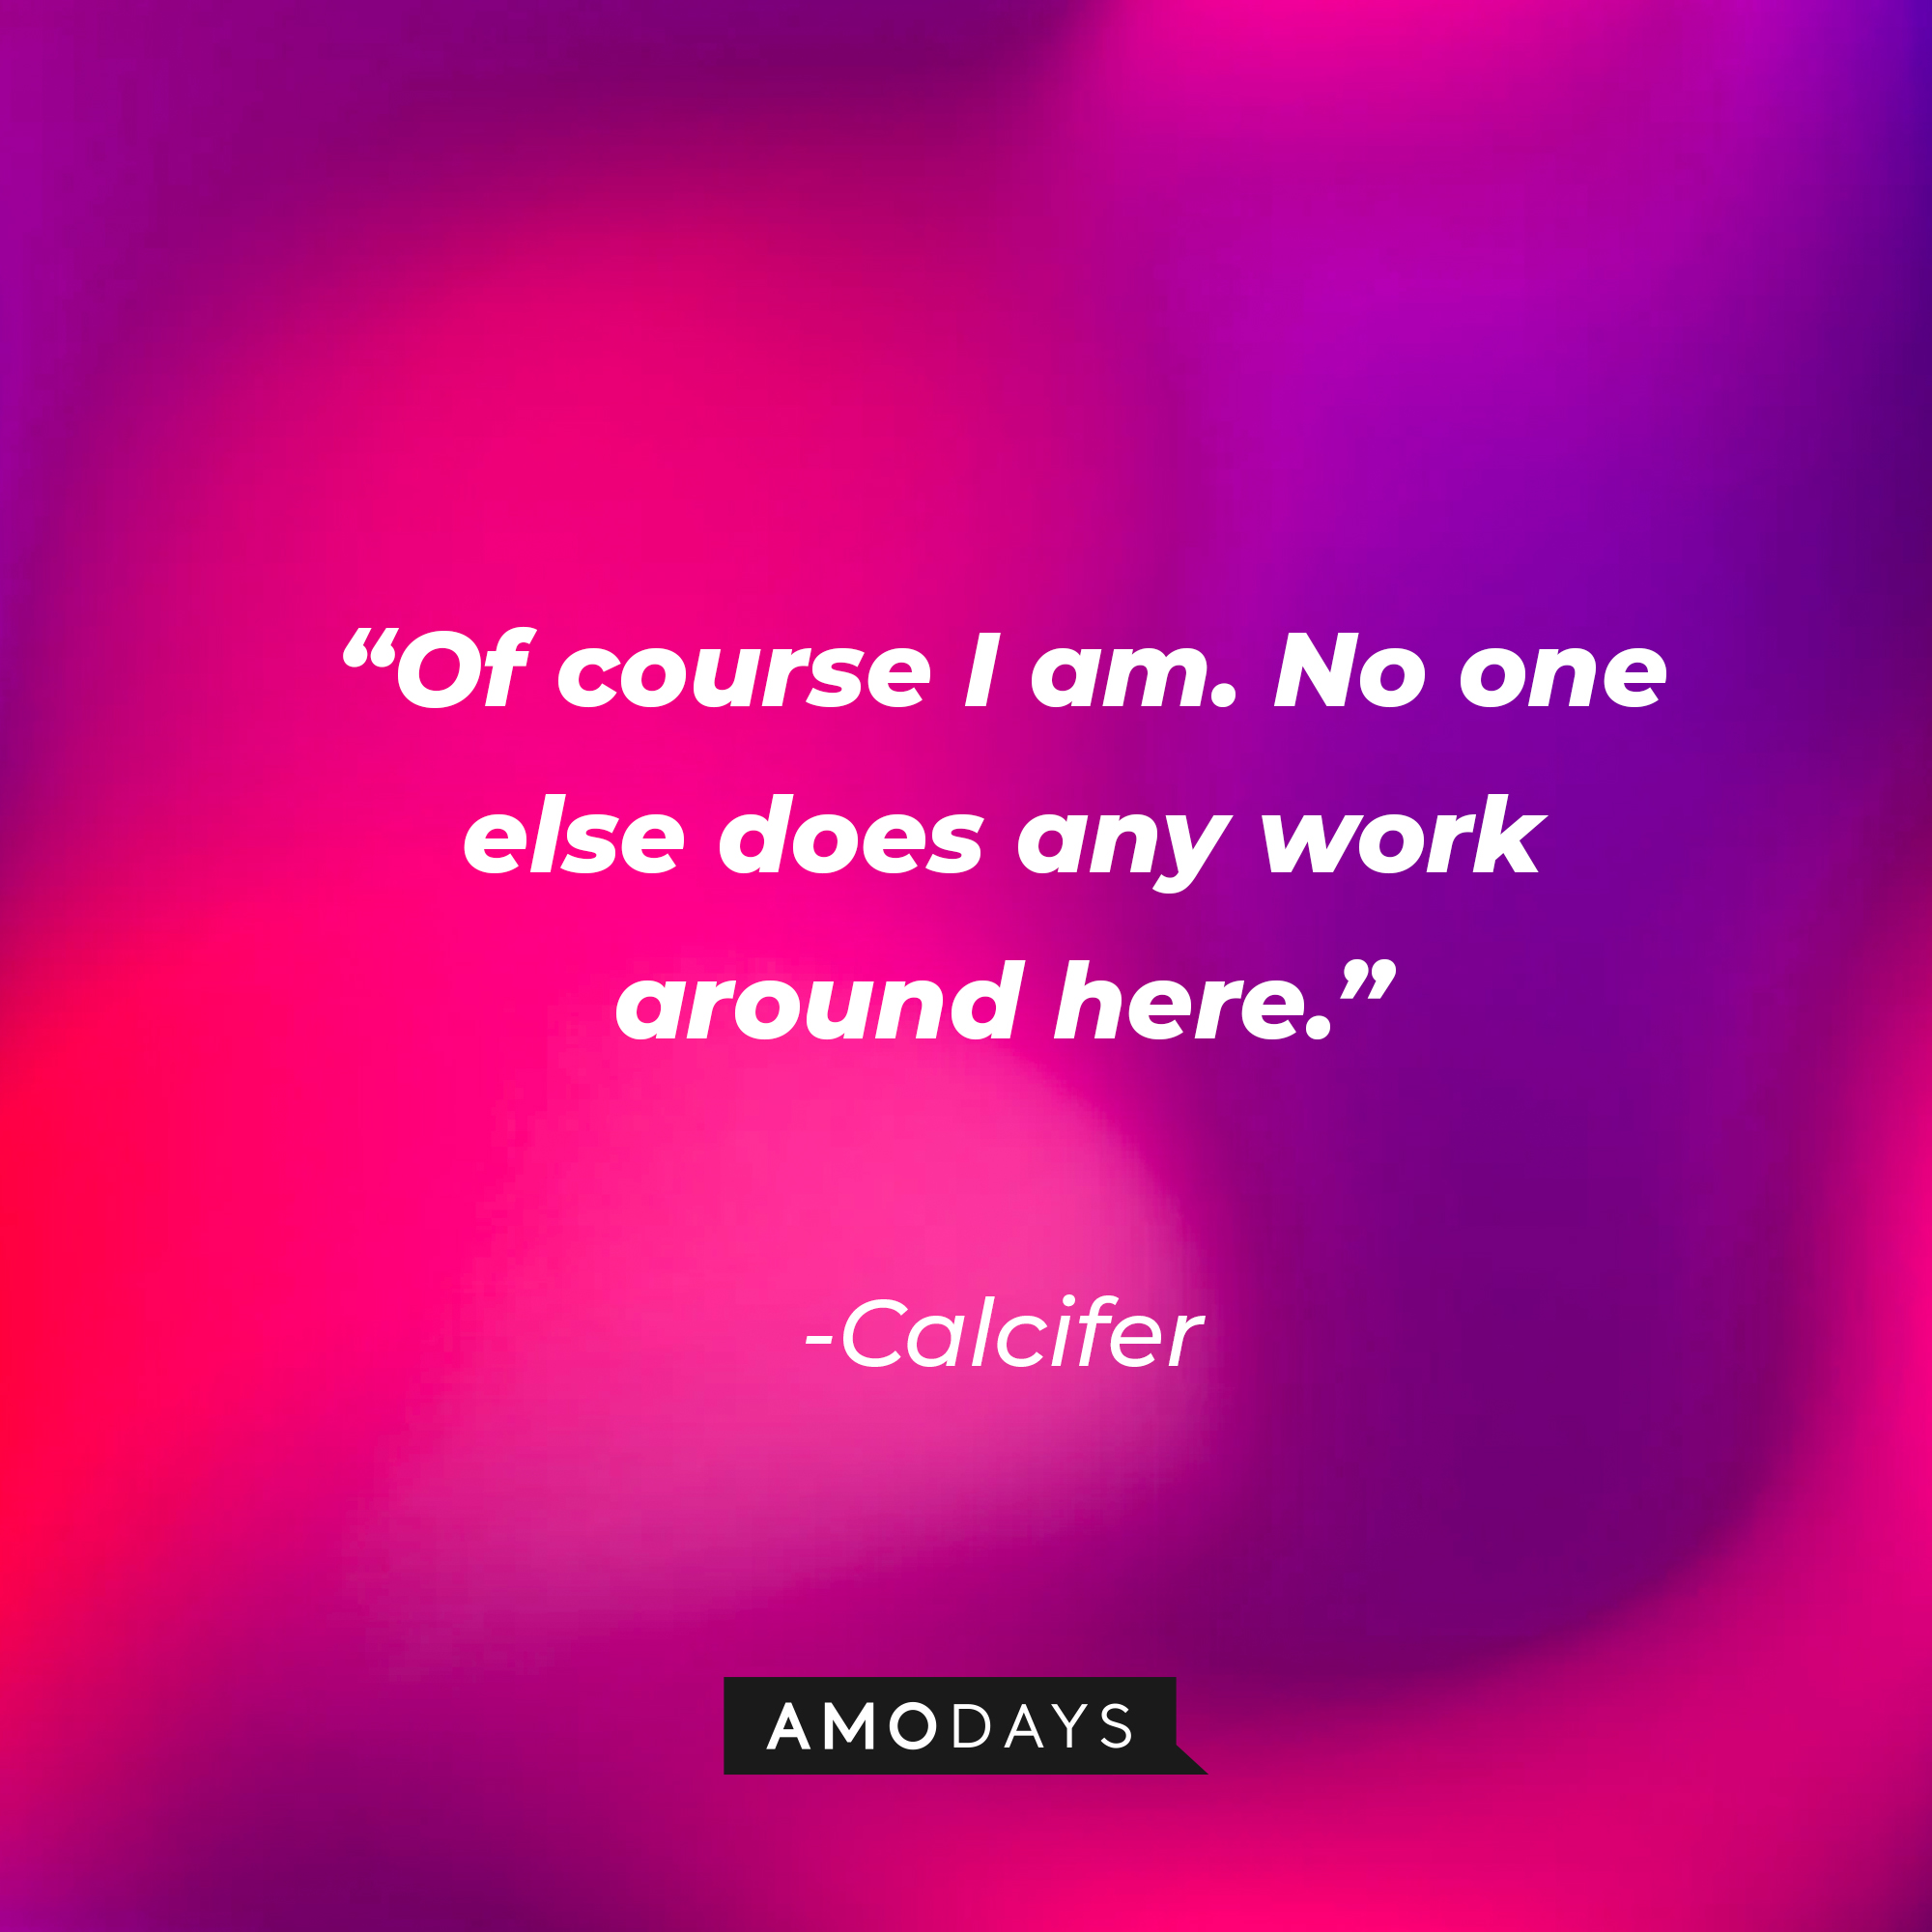 Calcifer’s quote: “Of course I am. No one else does any work around here.” | Source: AmoDays